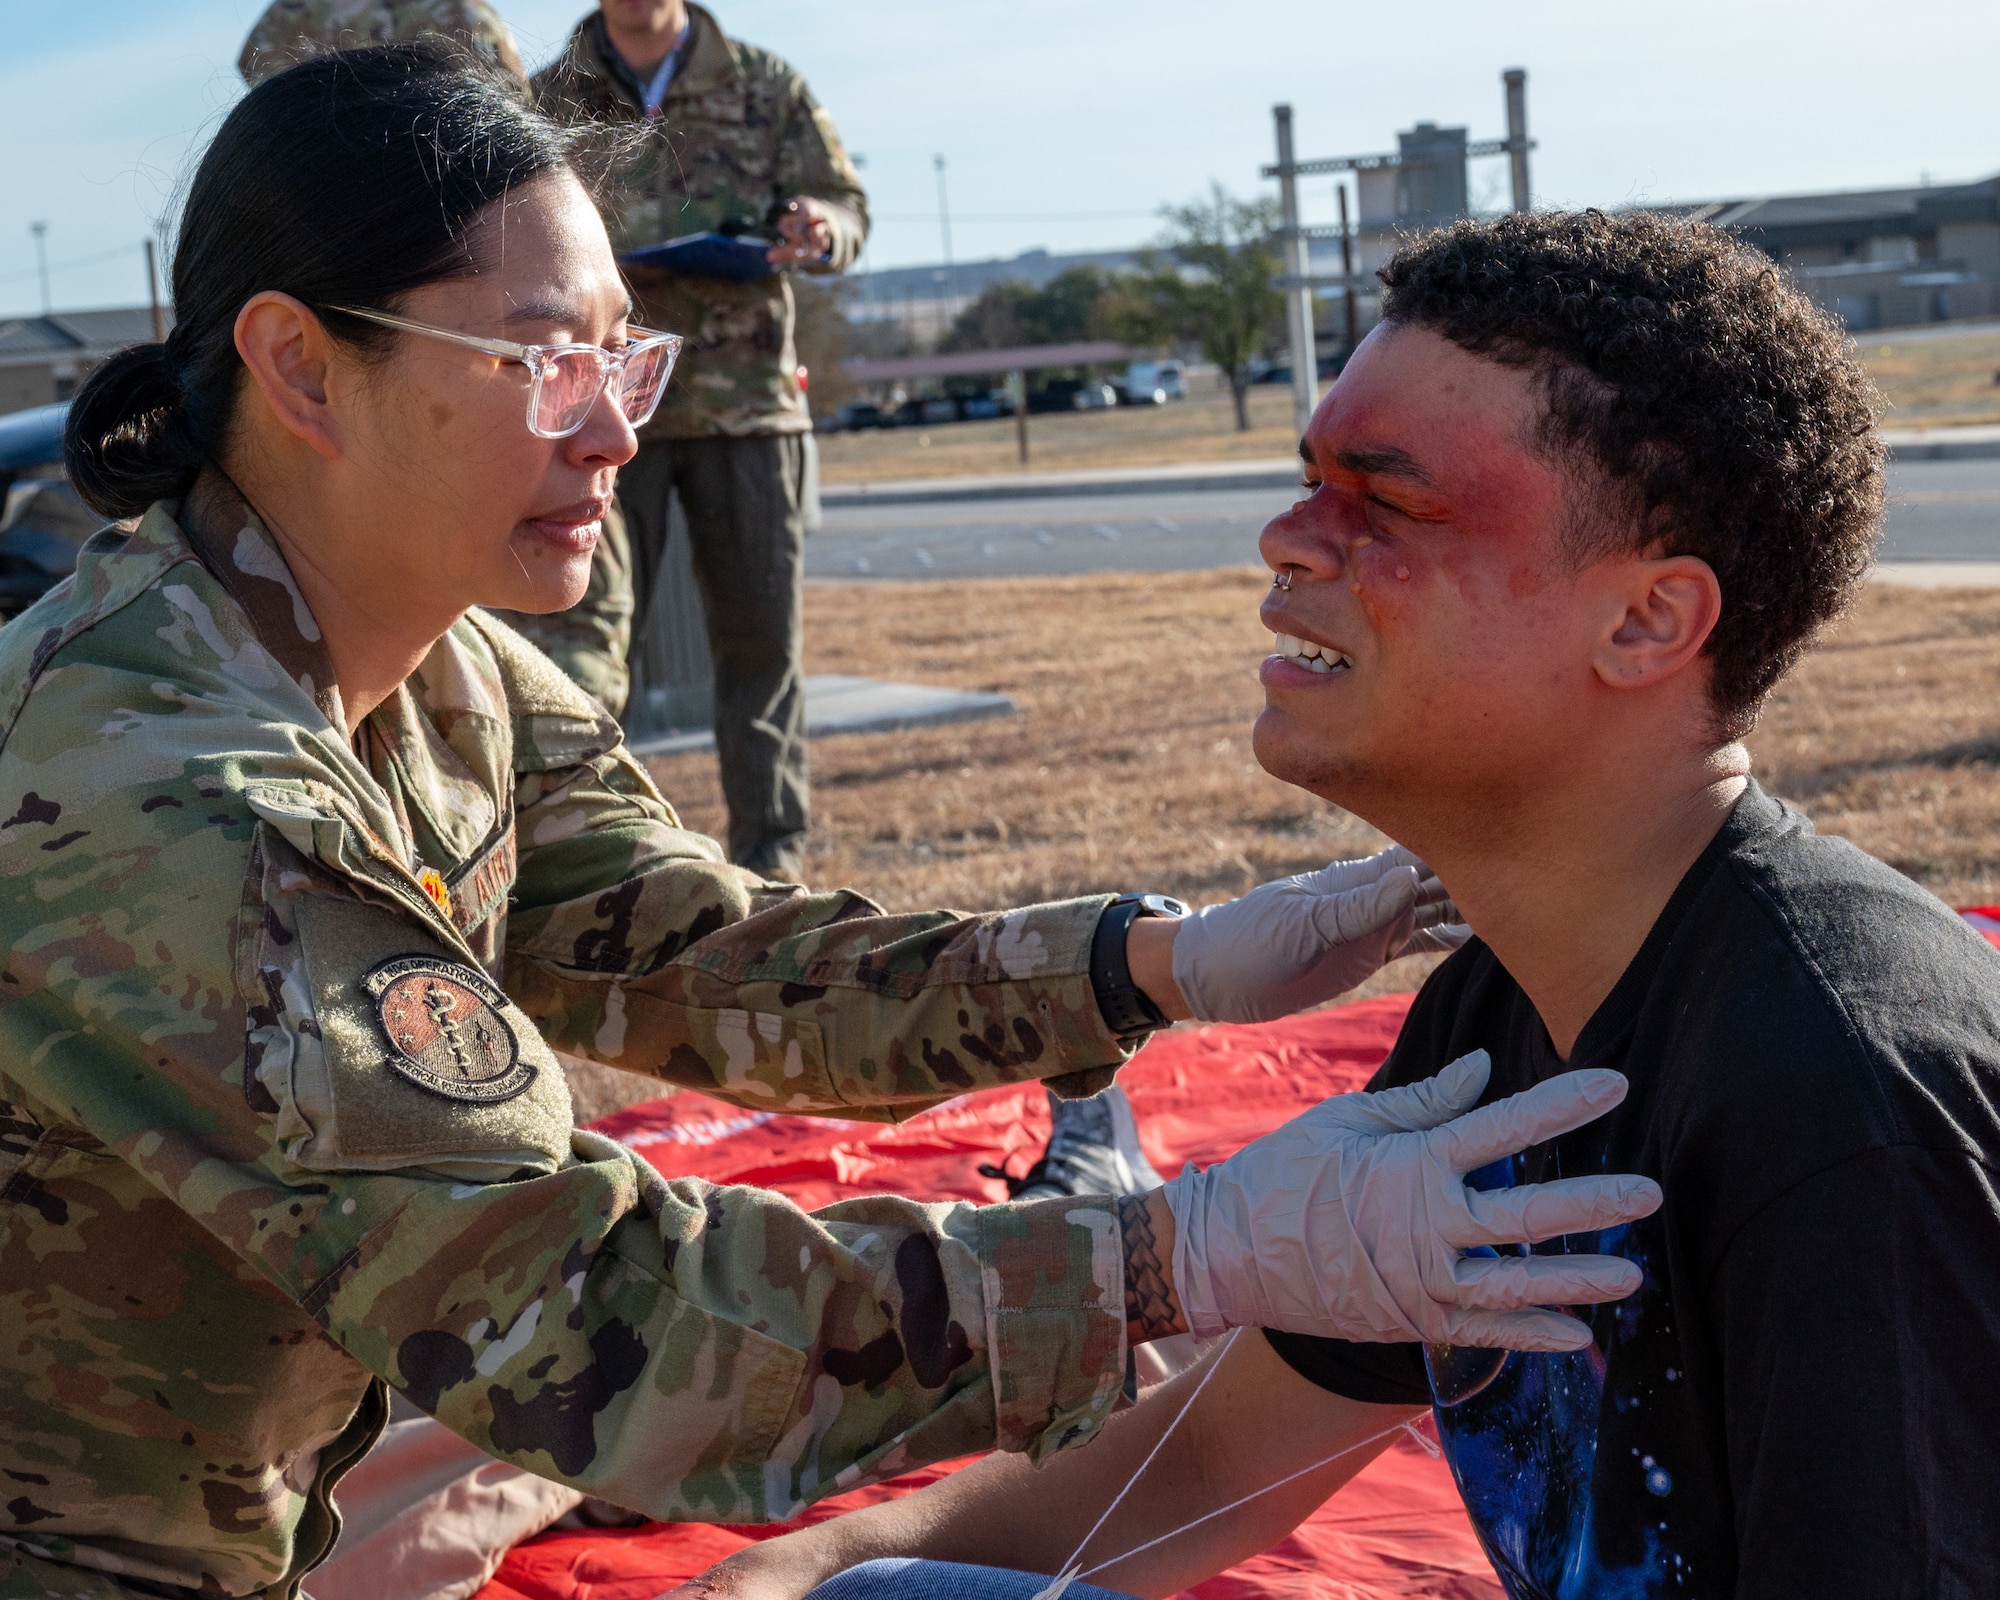 U.S. Air Force Tech. Sgt. Jasmine Pabalan, 47th Operational Medical Readiness Squadron flight medicine chief, checks the simulated injuries of an Airman during exercise Ready Eagle II at Laughlin Air Force Base, Texas, Jan. 31, 2024. Exercise Ready Eagle II allowed Airmen to sharpen their response procedures, patient care skills, and increase service member survivability. Airmen practiced responding to an explosion, treating trauma and chemical burns. (U.S. Air Force photo by Staff Sgt. Nicholas Larsen)